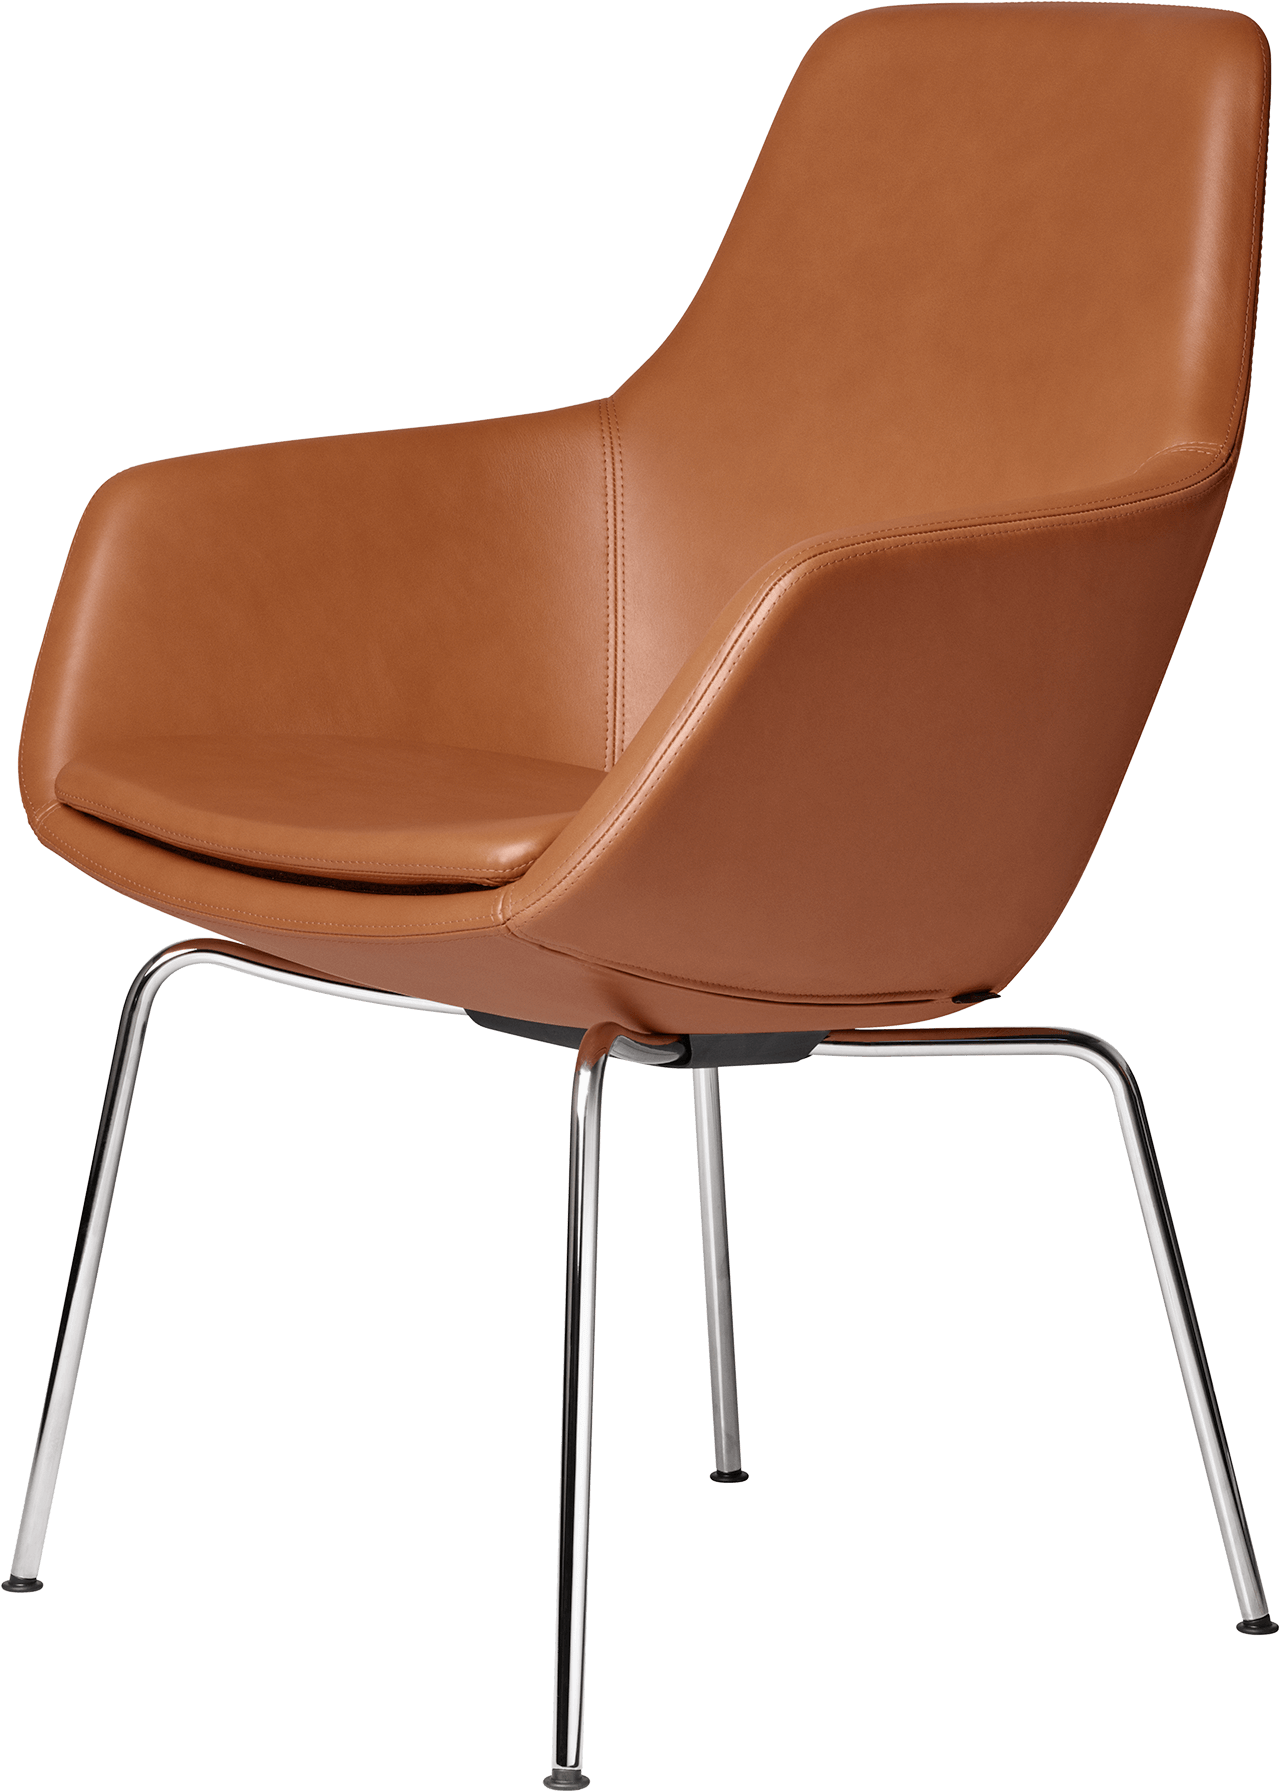 Modern Brown Leather Chair PNG